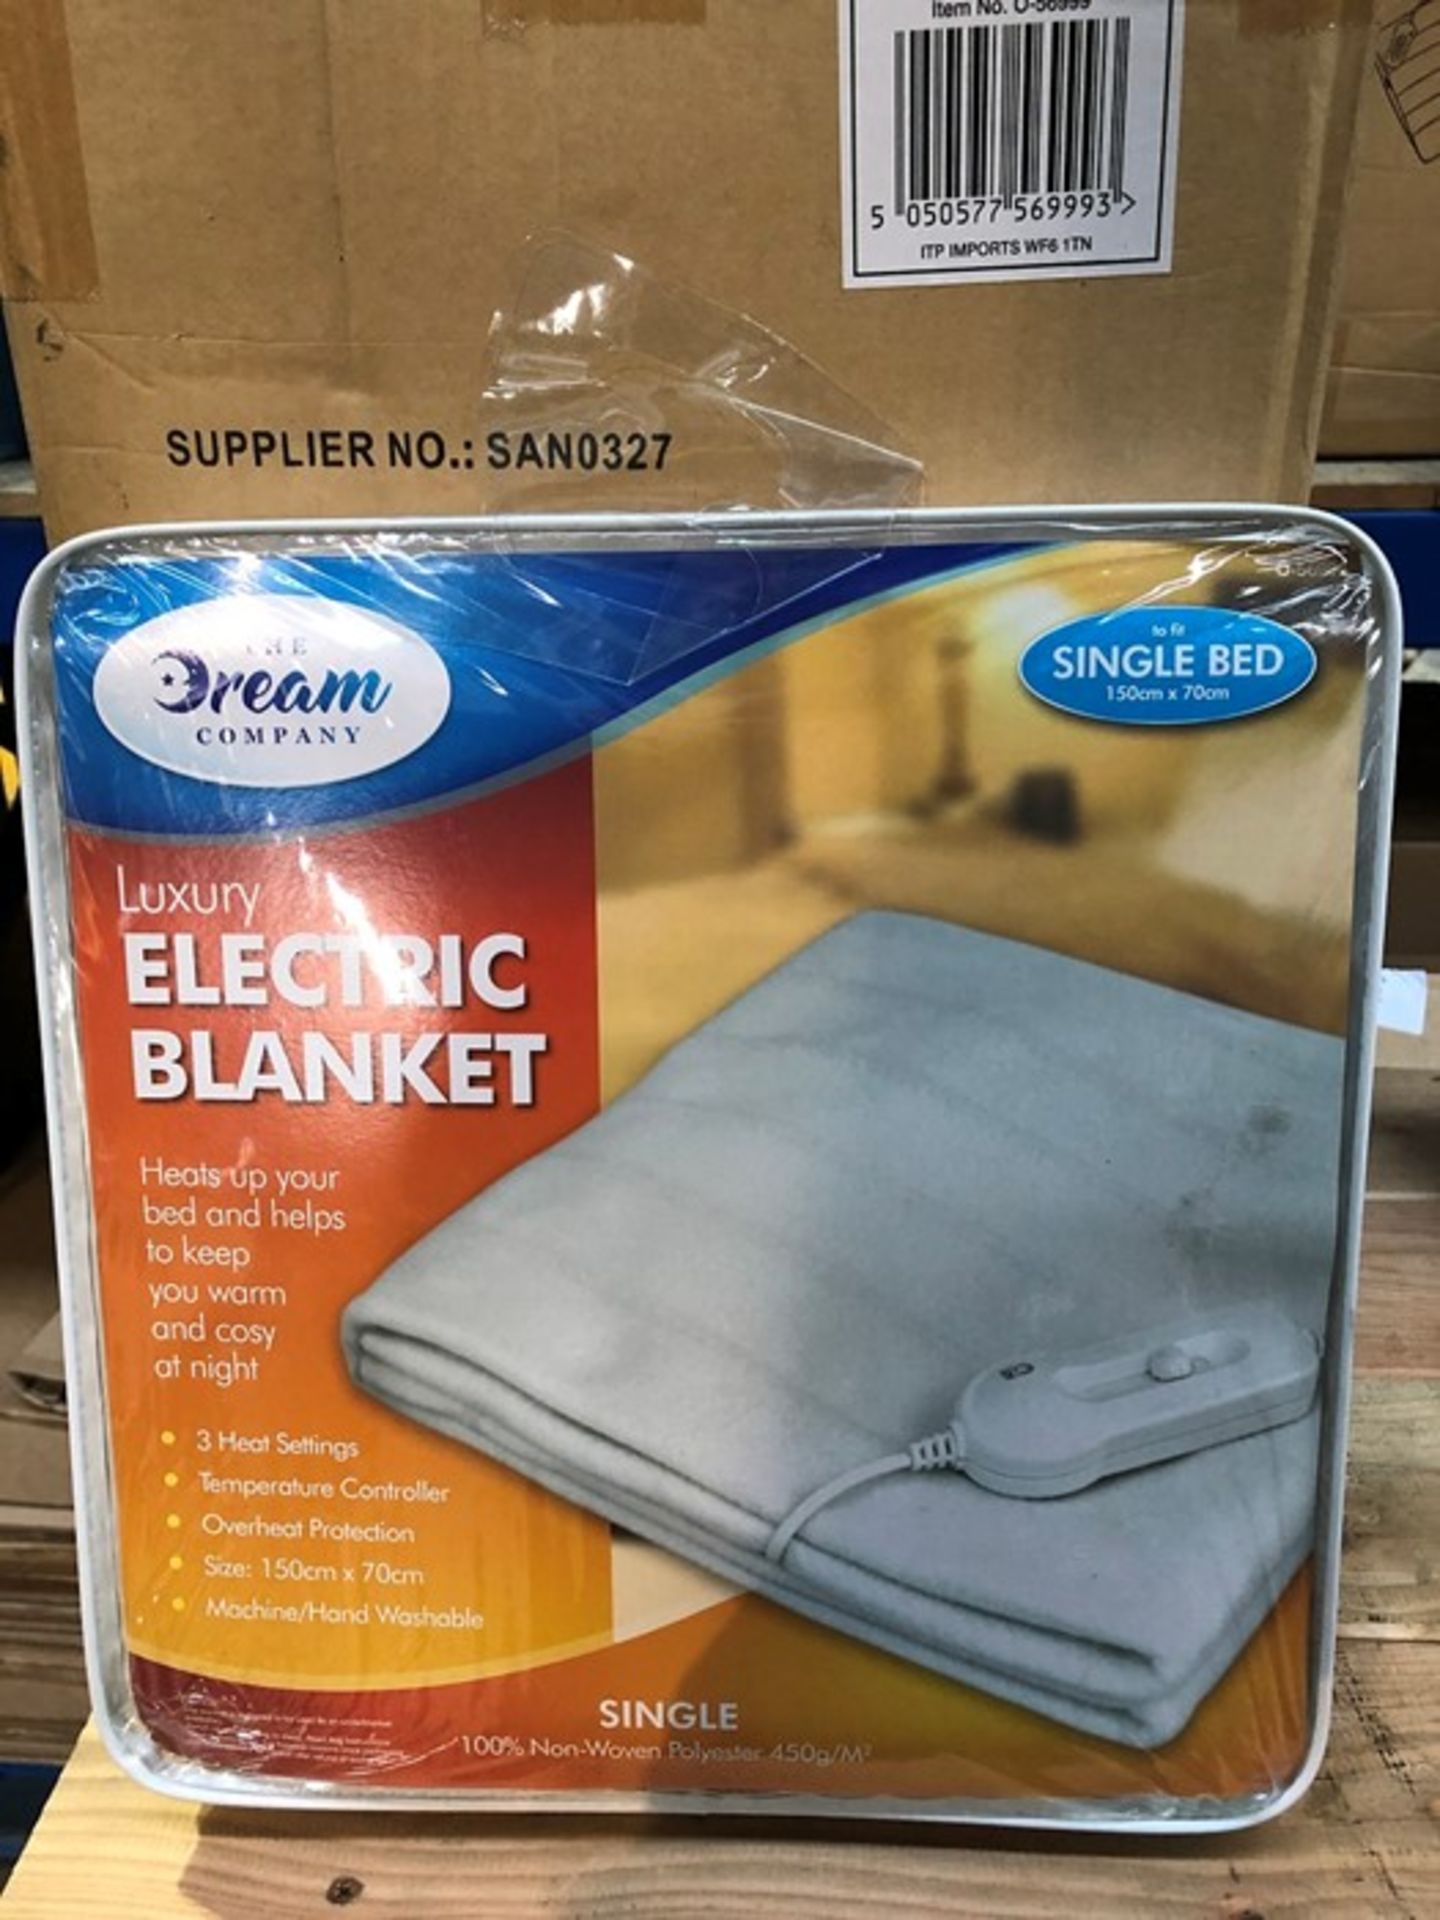 1 BAGGED THE DREAM COMPANY LUXURY ELECTRIC BLANKET - TO FIT A SINGLE BED / SIZE: 150 X 70CM (